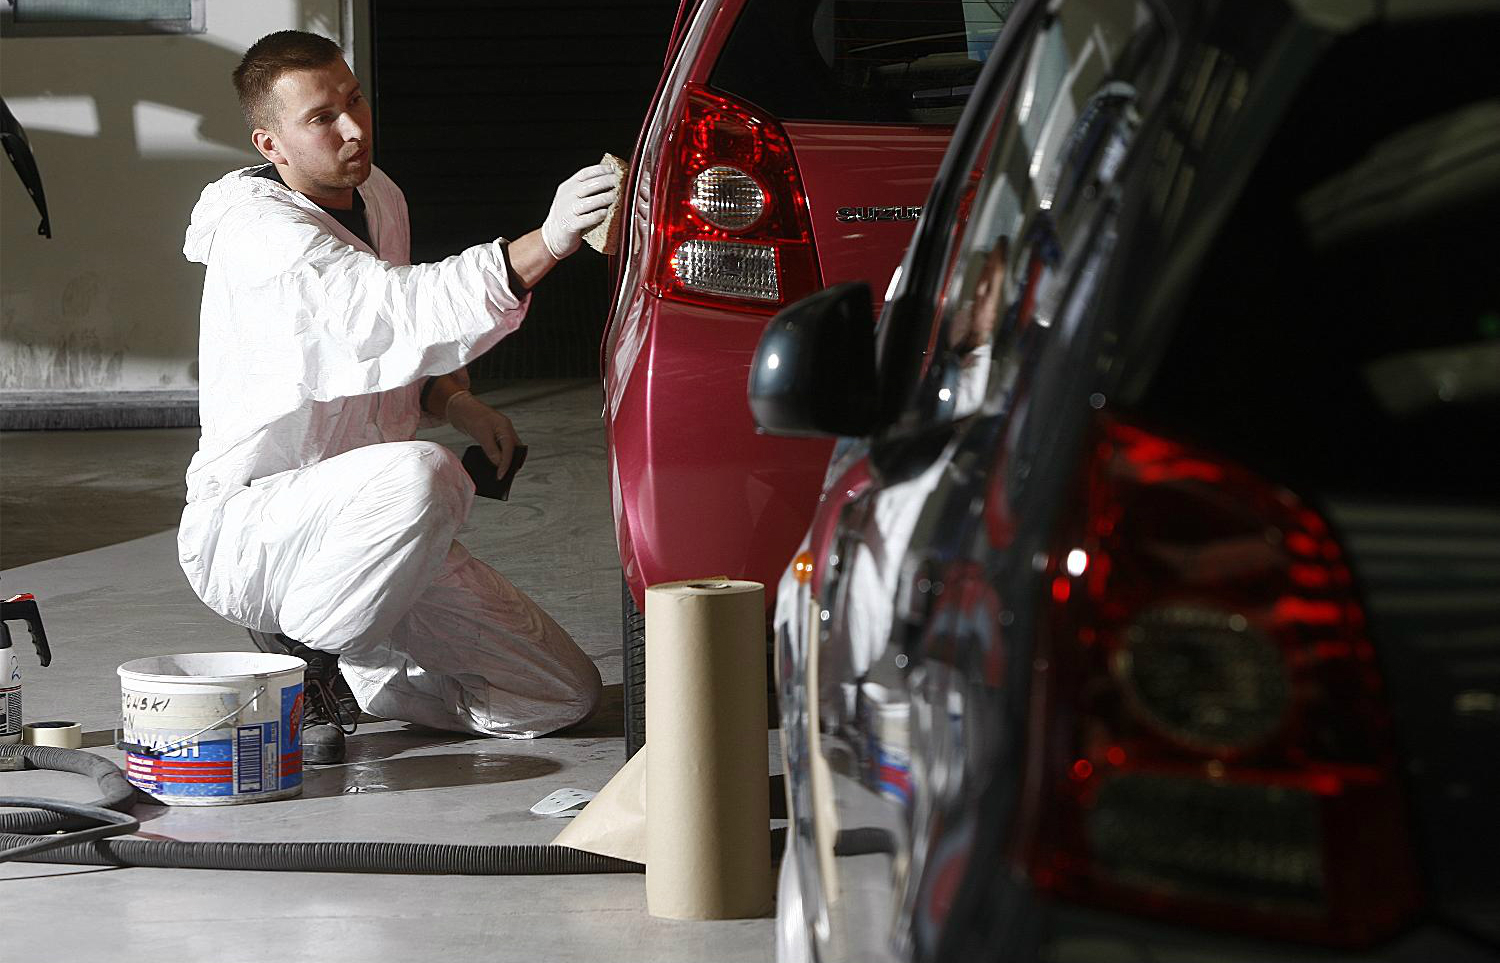 Work carried out by manufacturer-approved bodyshops is guaranteed to minimum standards